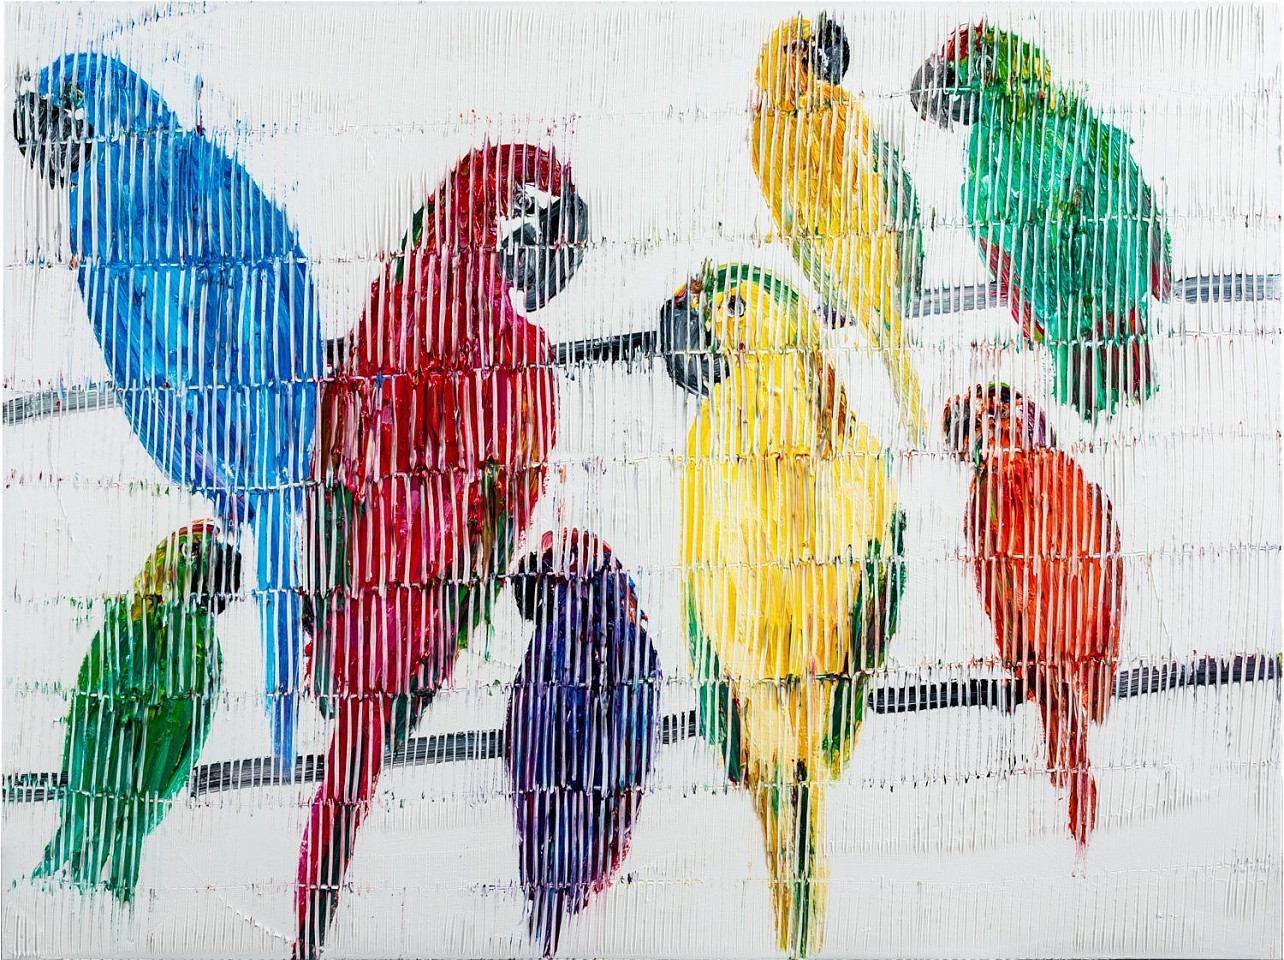 Hunt Slonem, Macaws & Amazon Aviary, 2023
Oil on Canvas, 36 x 48 in.